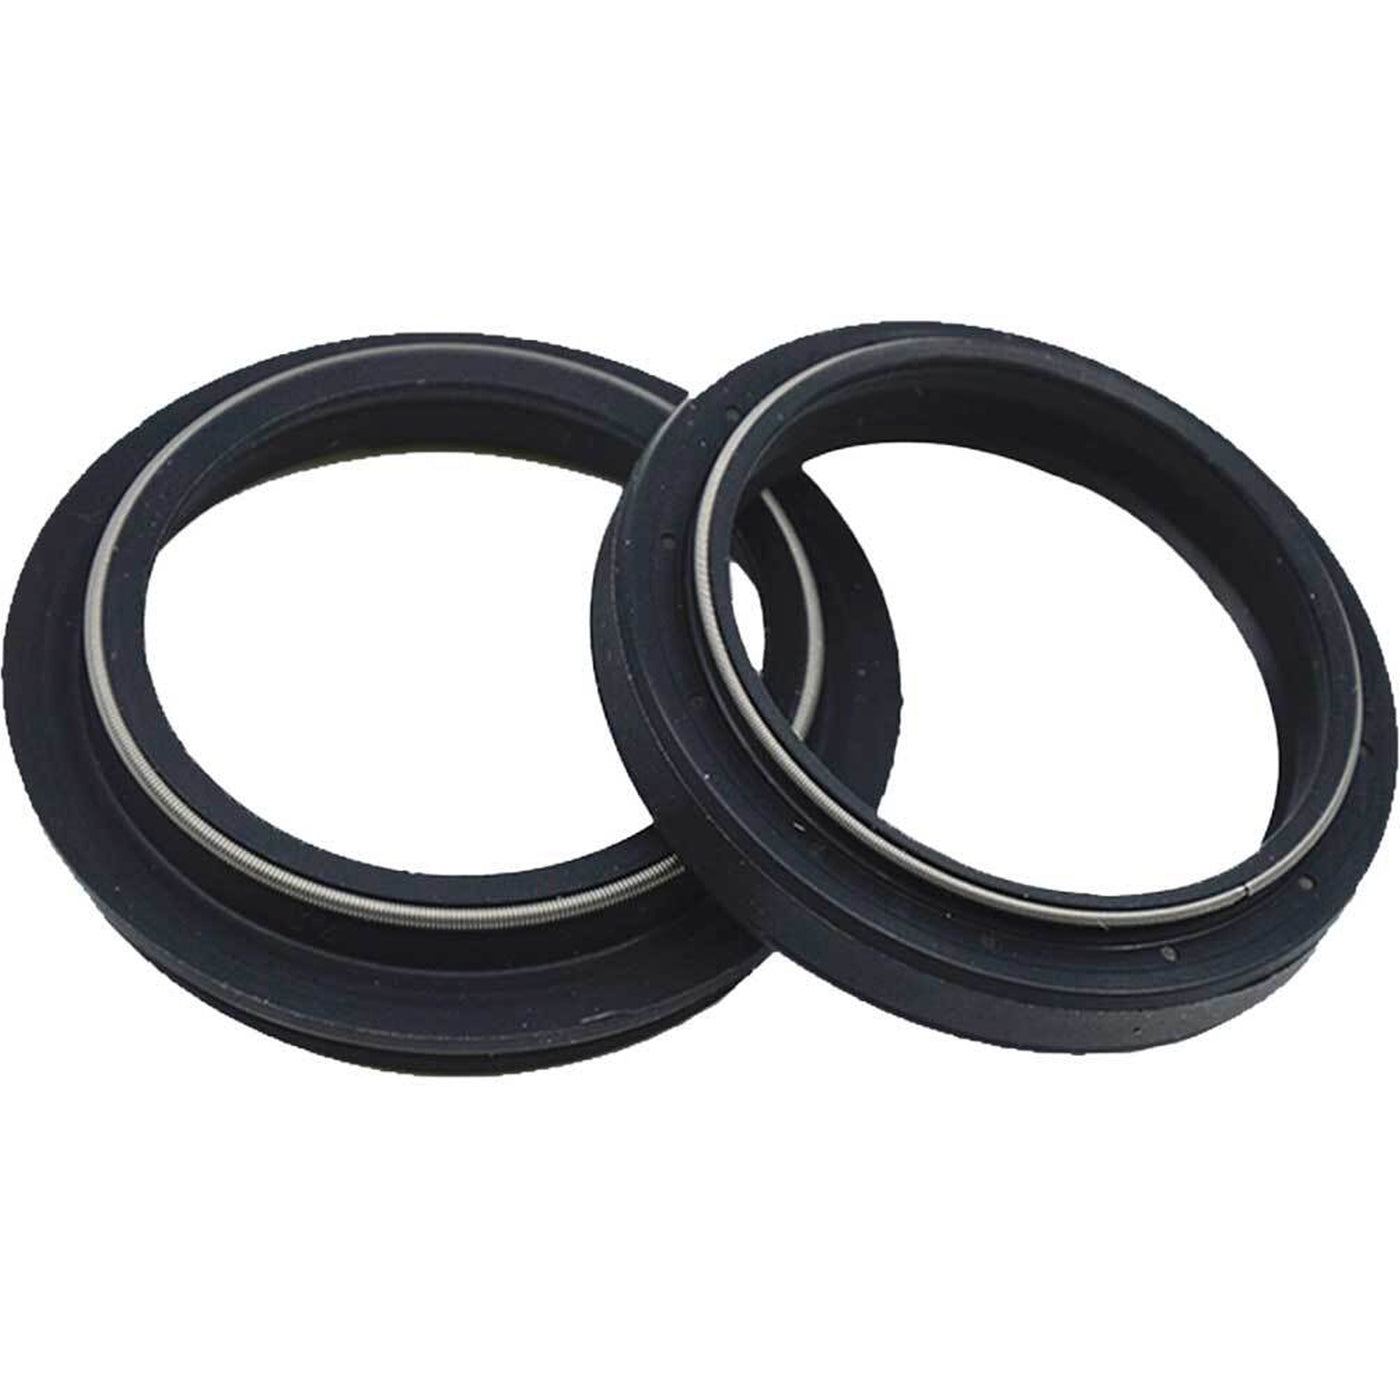 SKF fork seals for WP